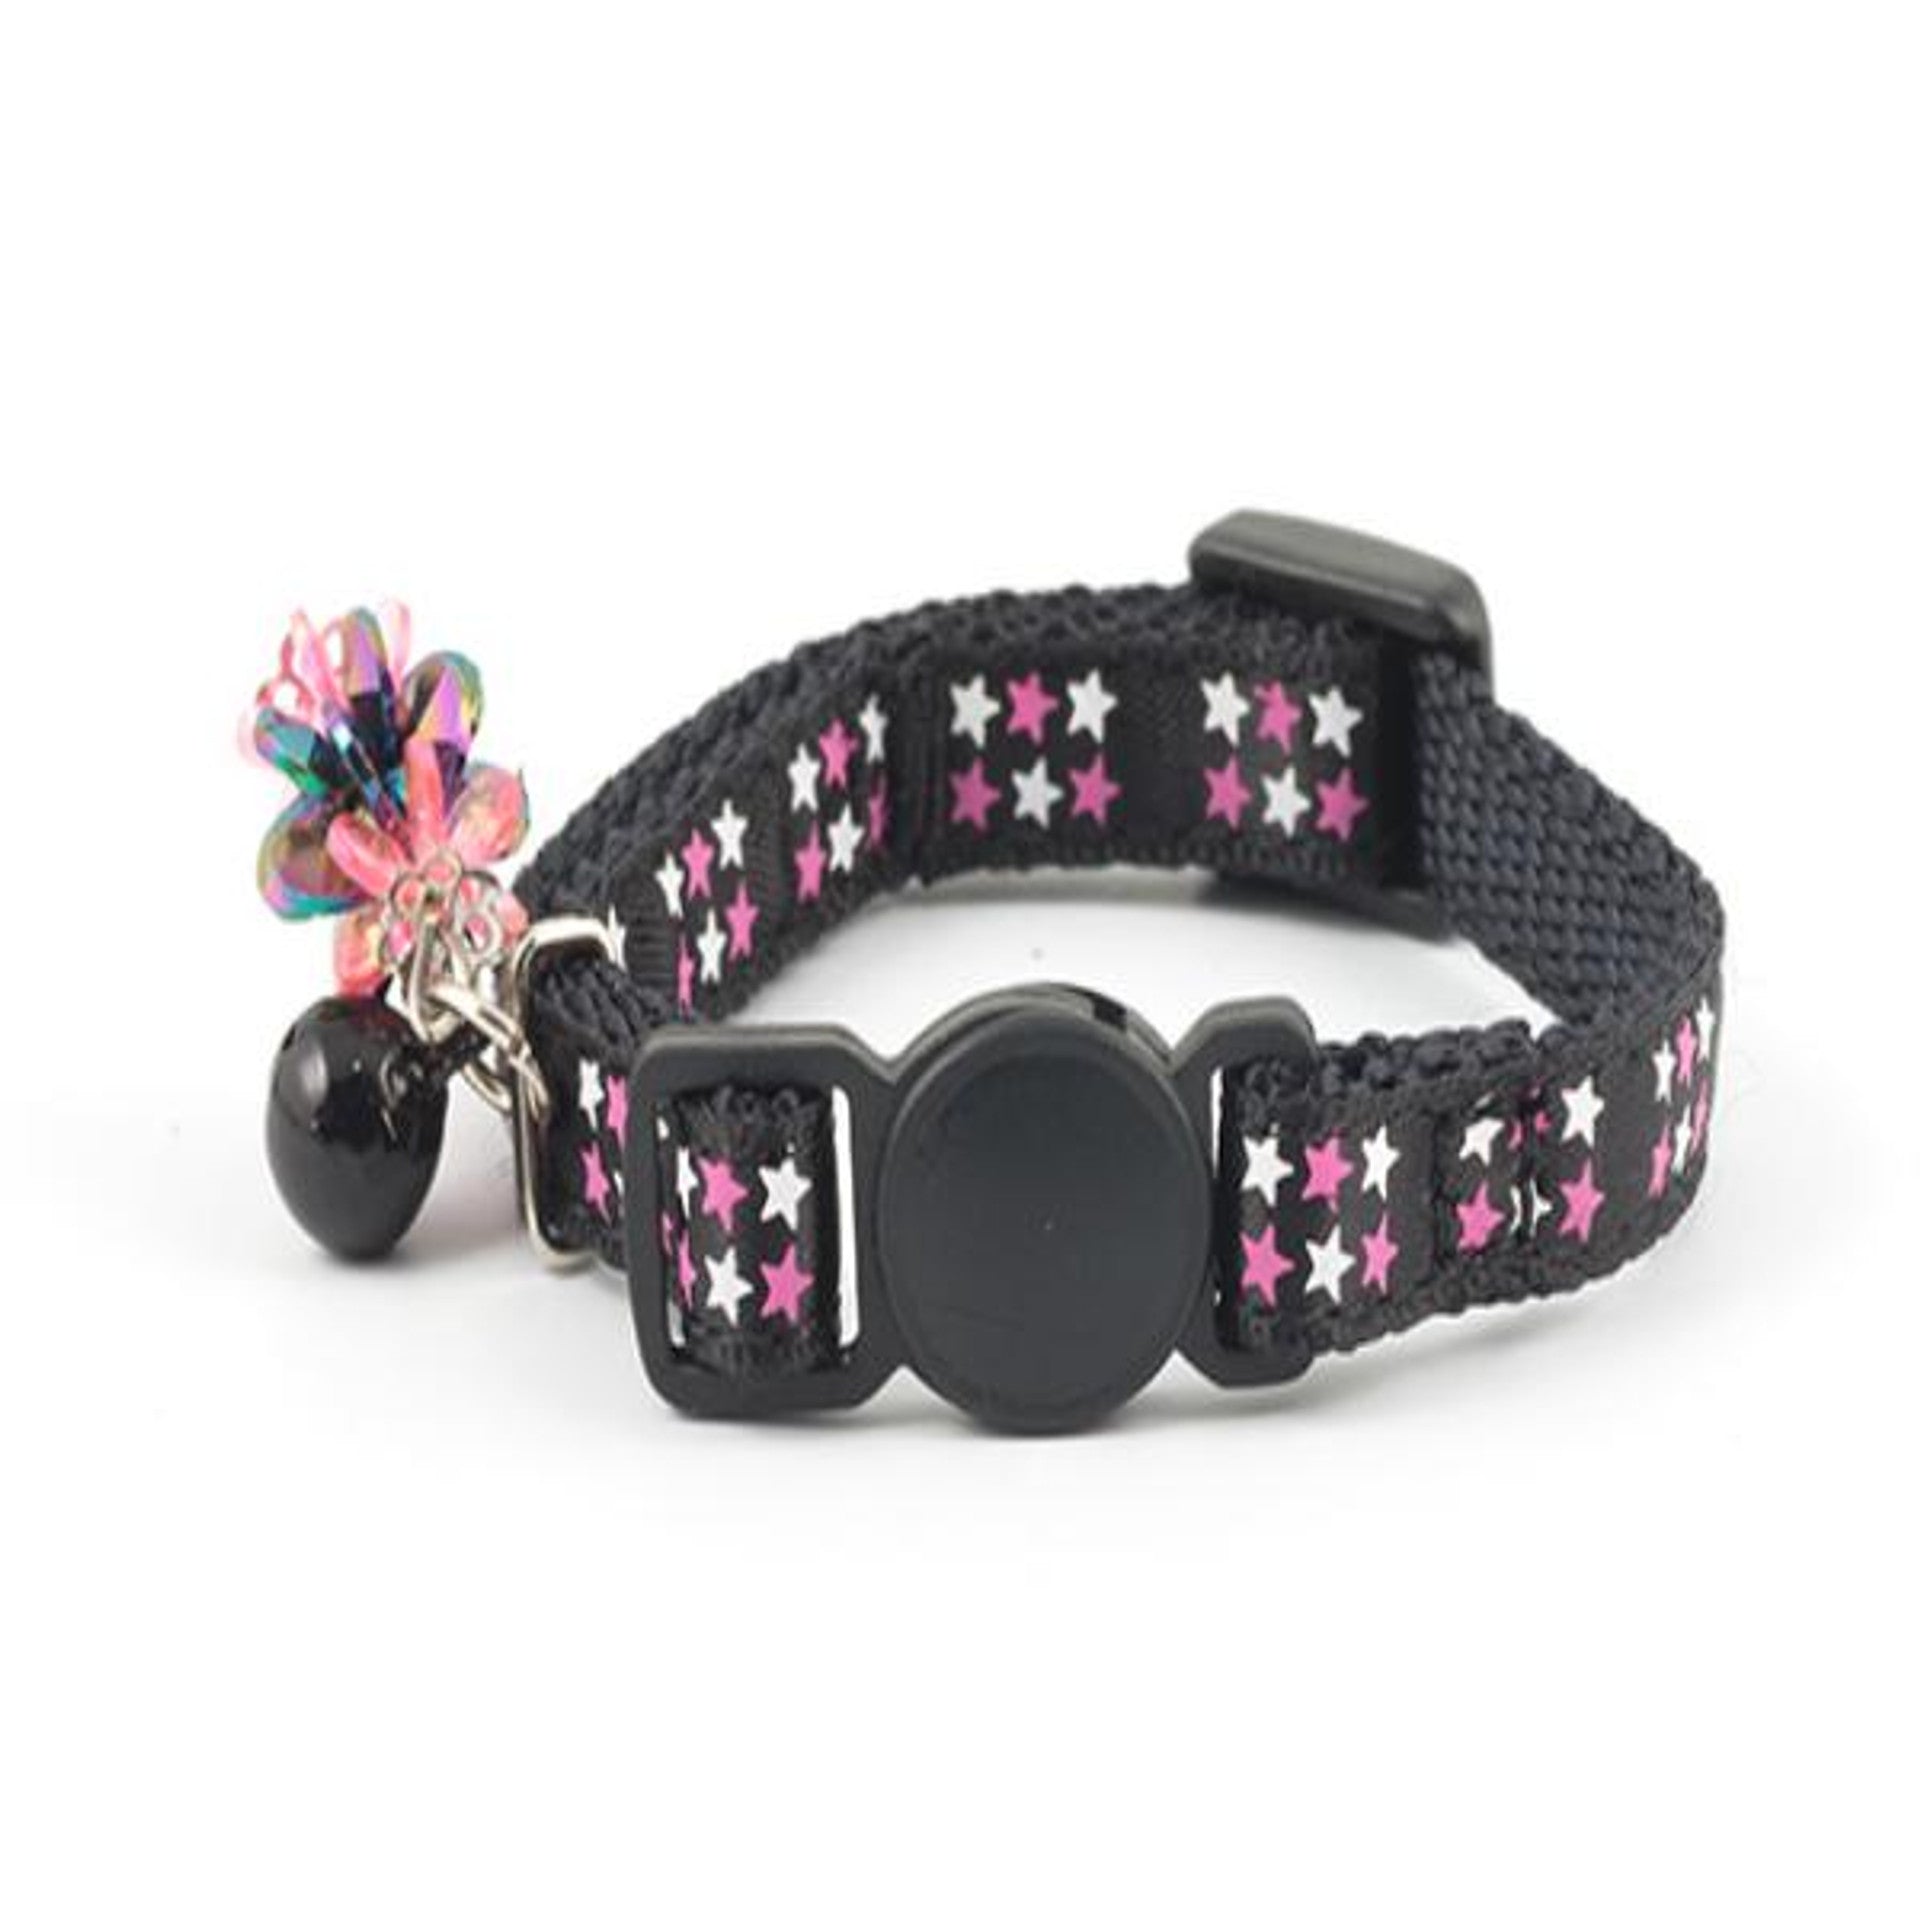 Ancol Kitten Star Collar with Safety Buckle, The Cat Gallery